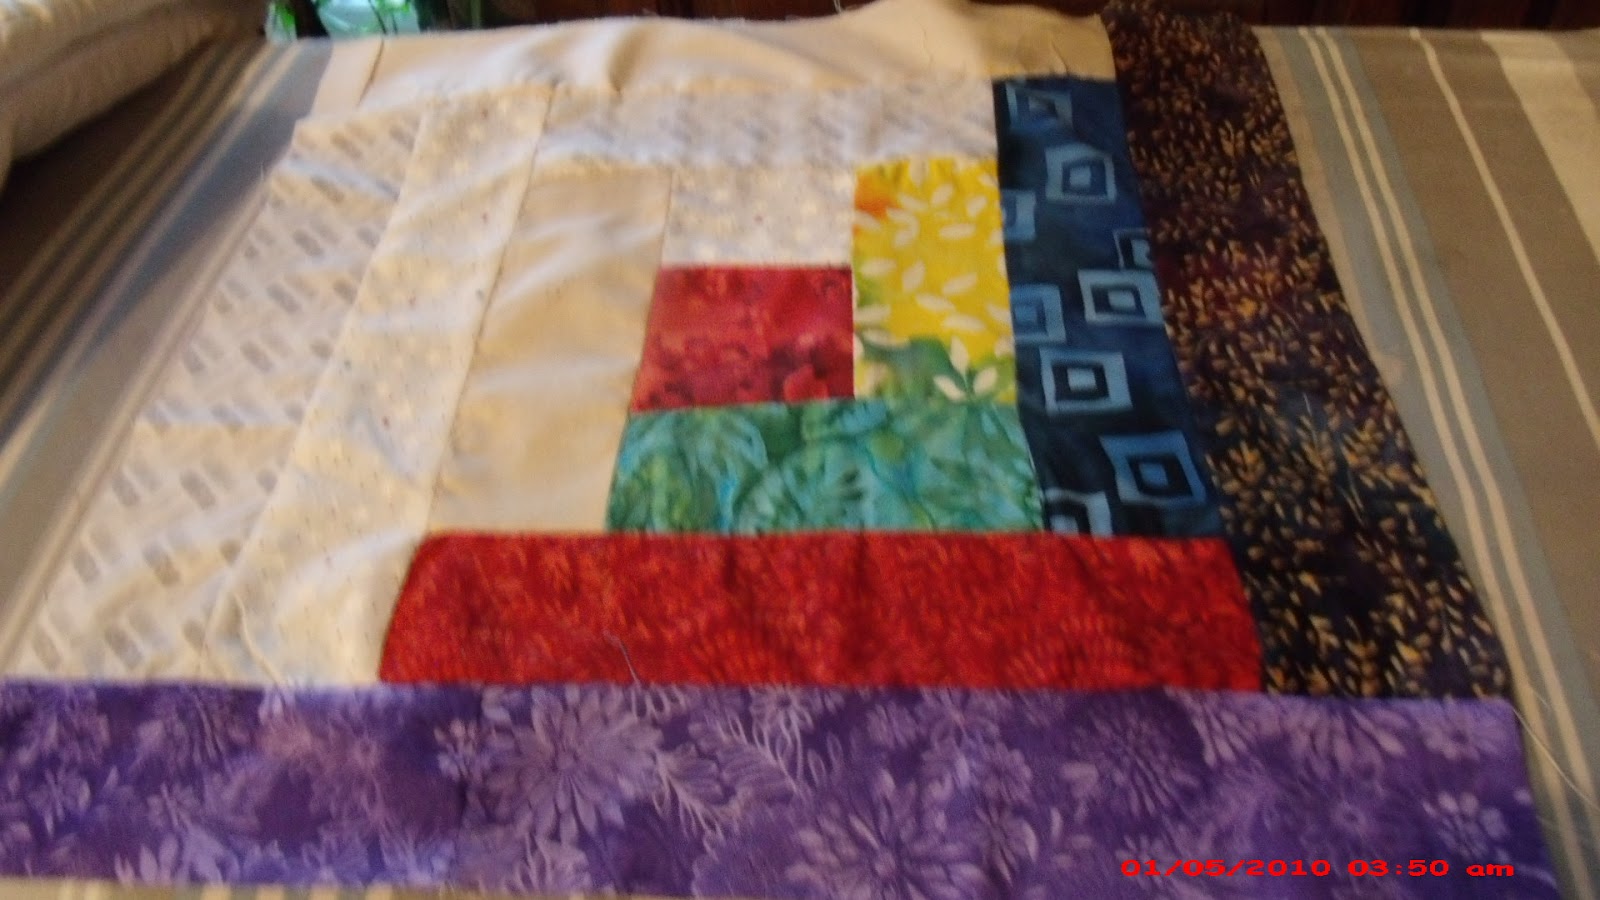 Quilting Blogs - What are quilters blogging about today? 28